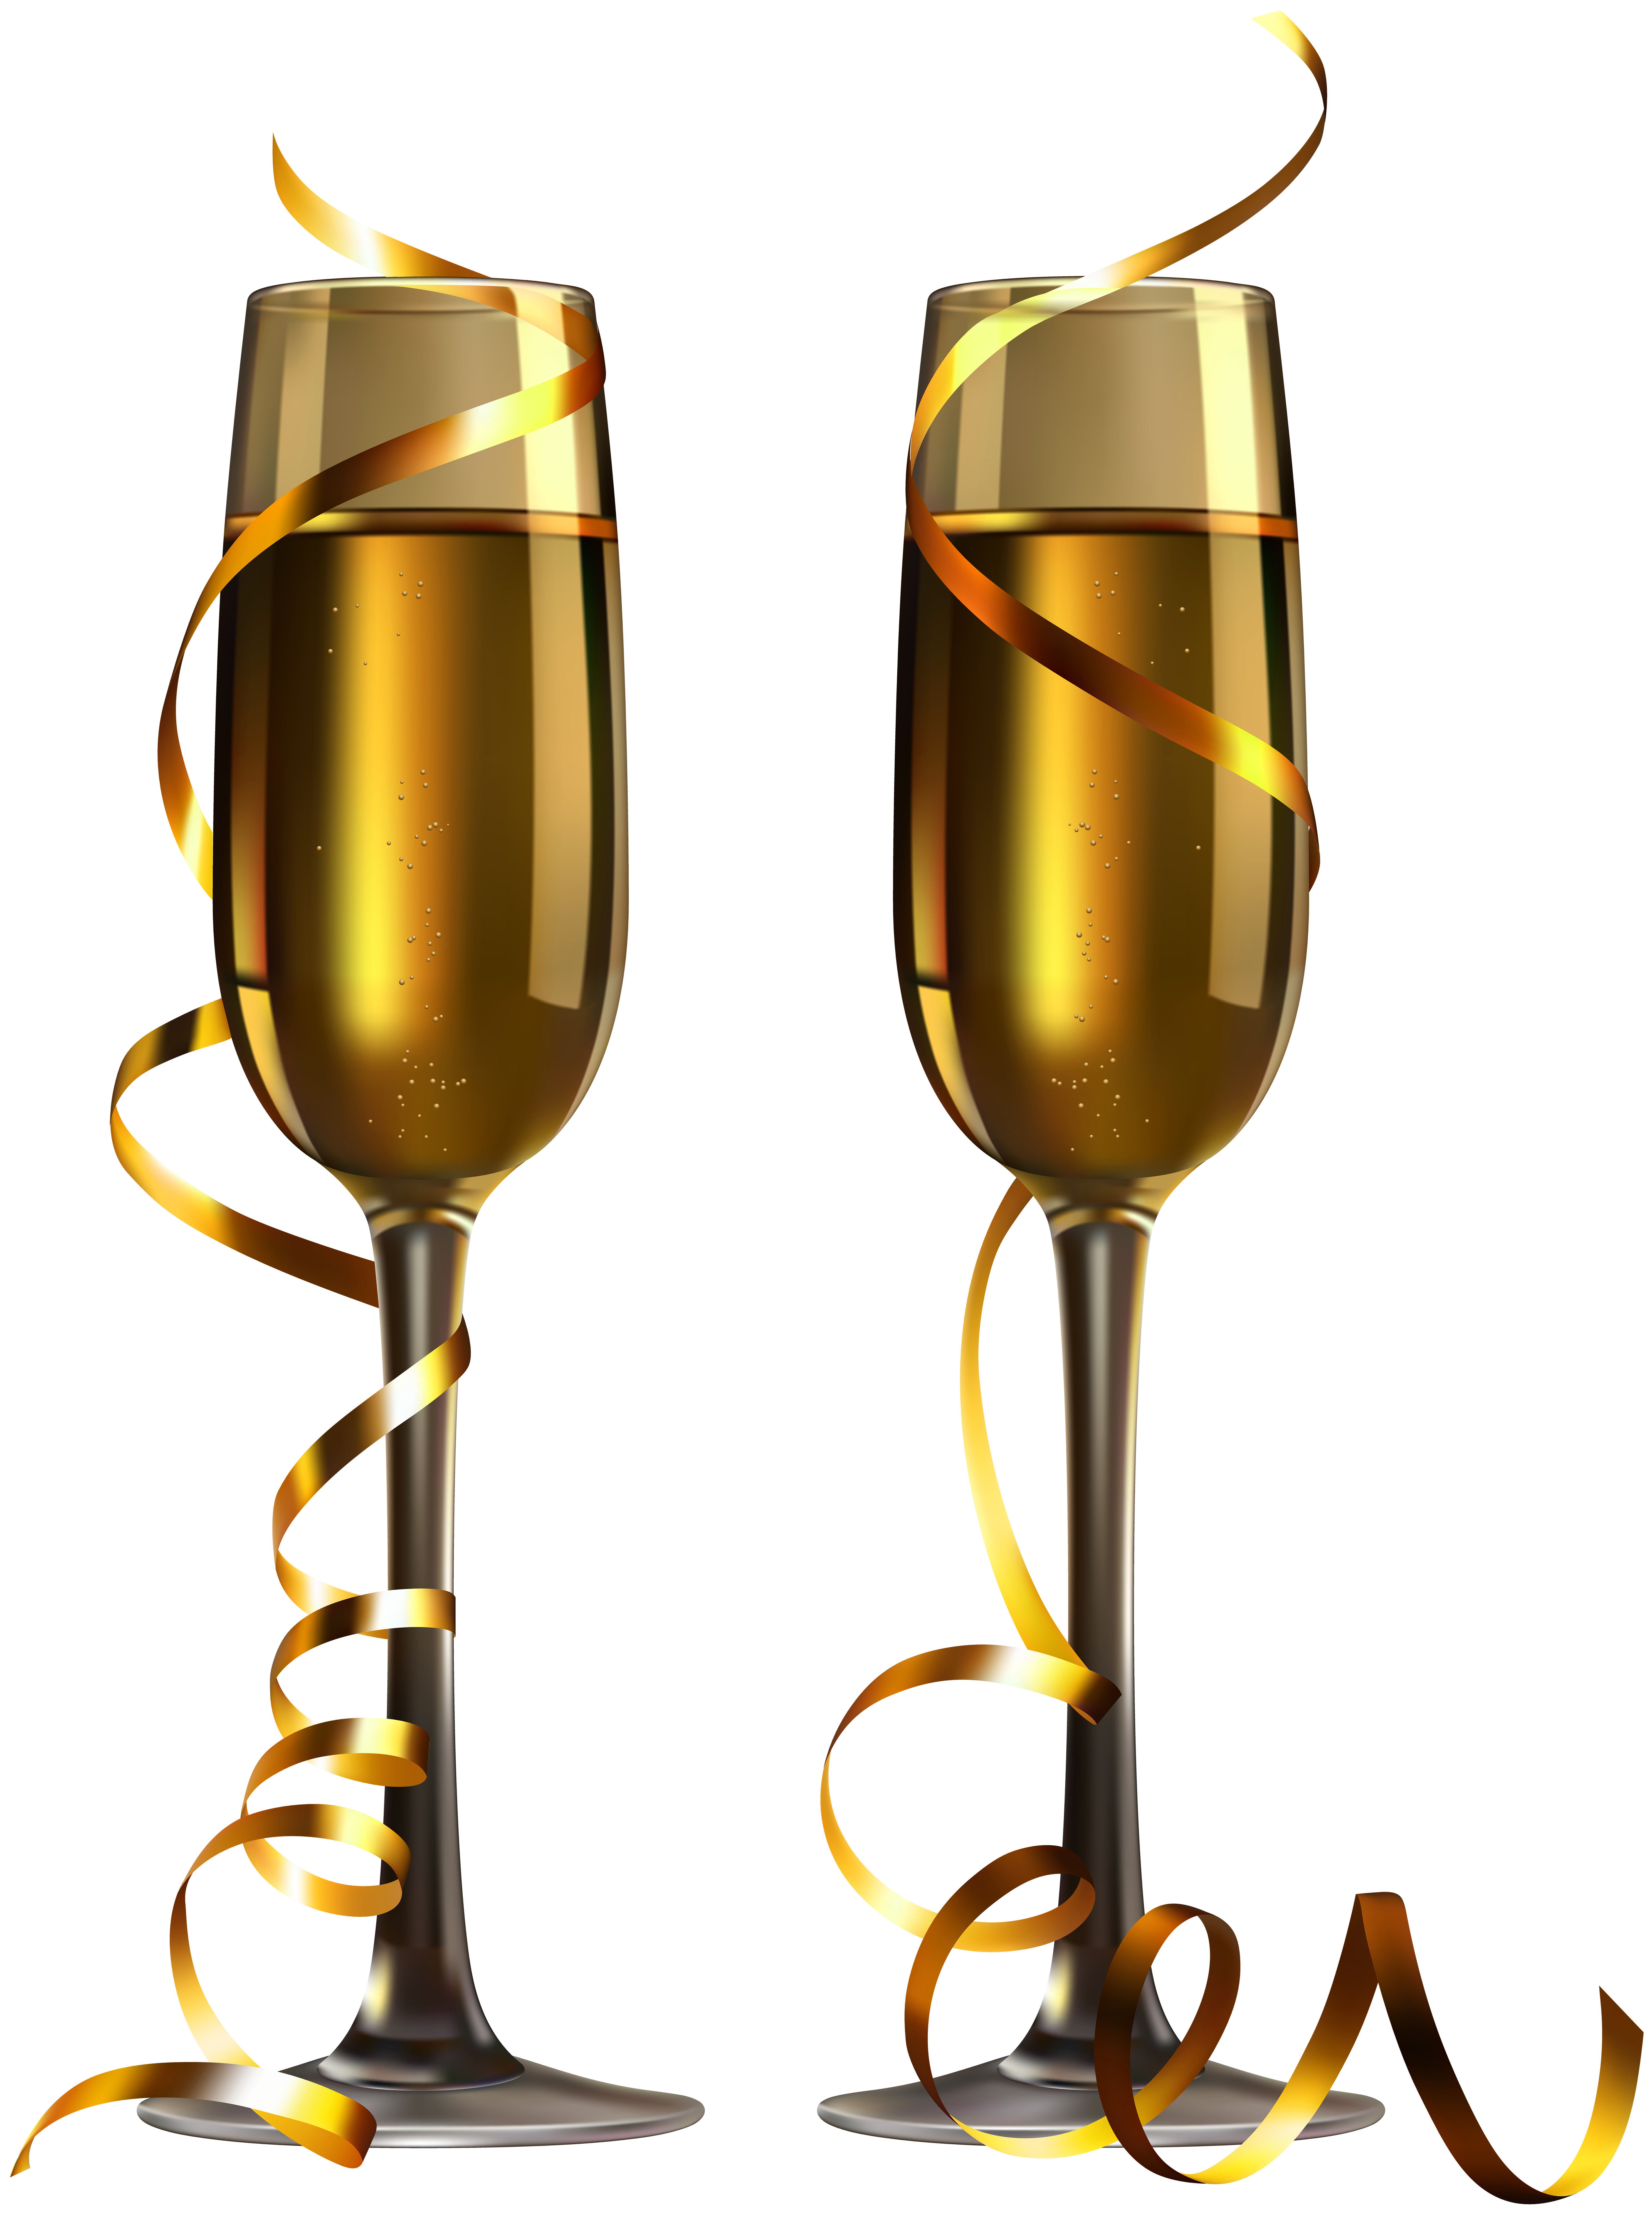 Champagne png image gallery. Glasses clipart new year